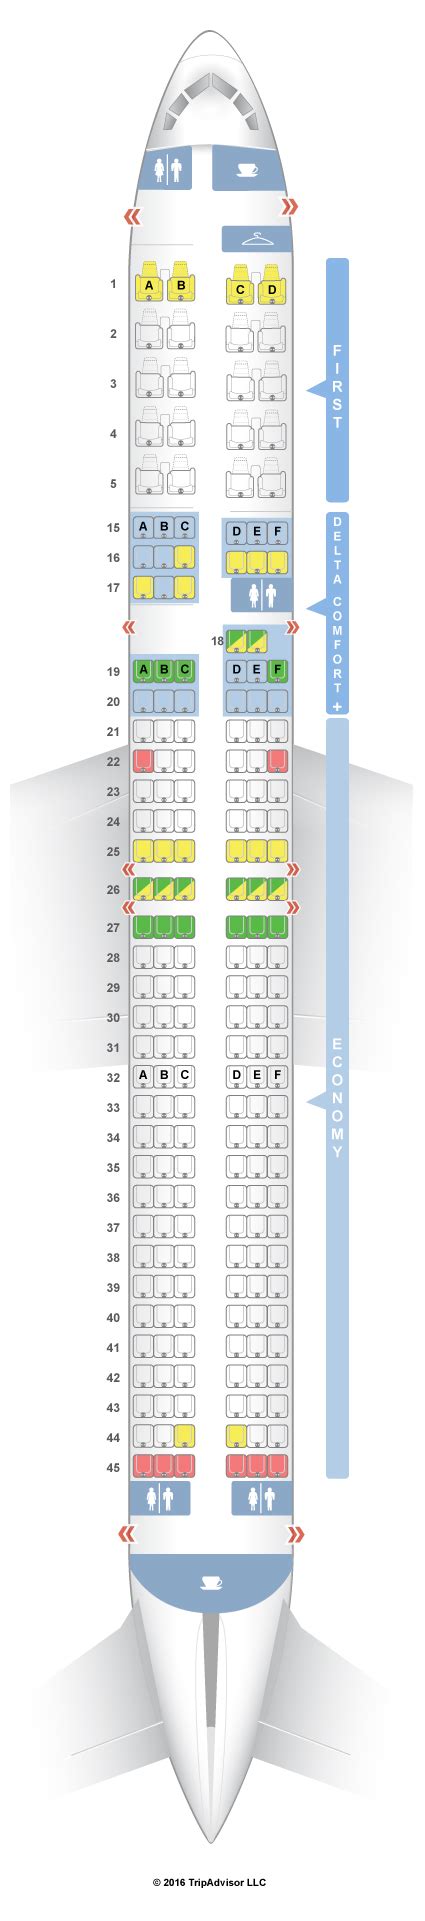 Delta Airlines Boeing Seating Chart Hot Sex Picture